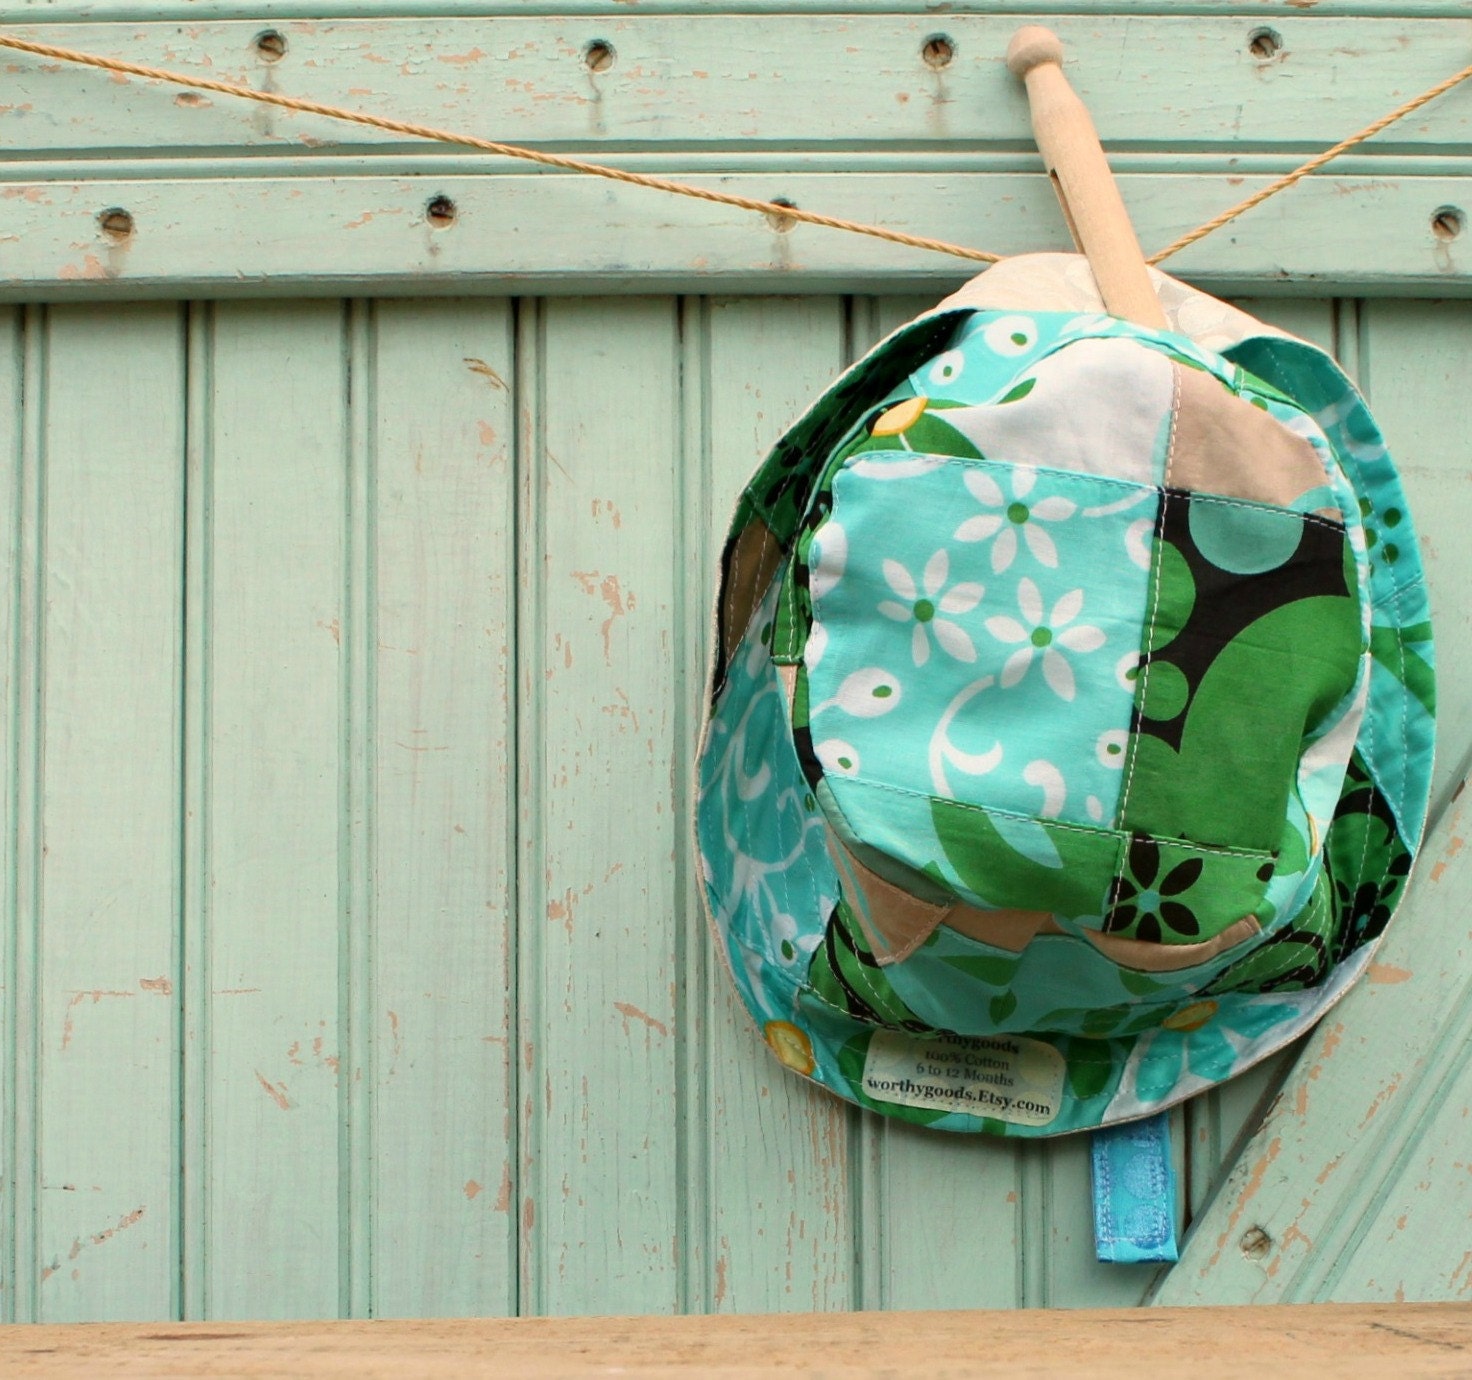 Kids Sun Hat 4T 5T 6 7 8 Years - Kelly Egg Blue Floral Patchwork Bucket Cap with Bright Flowers - Ready to Ship - worthygoods